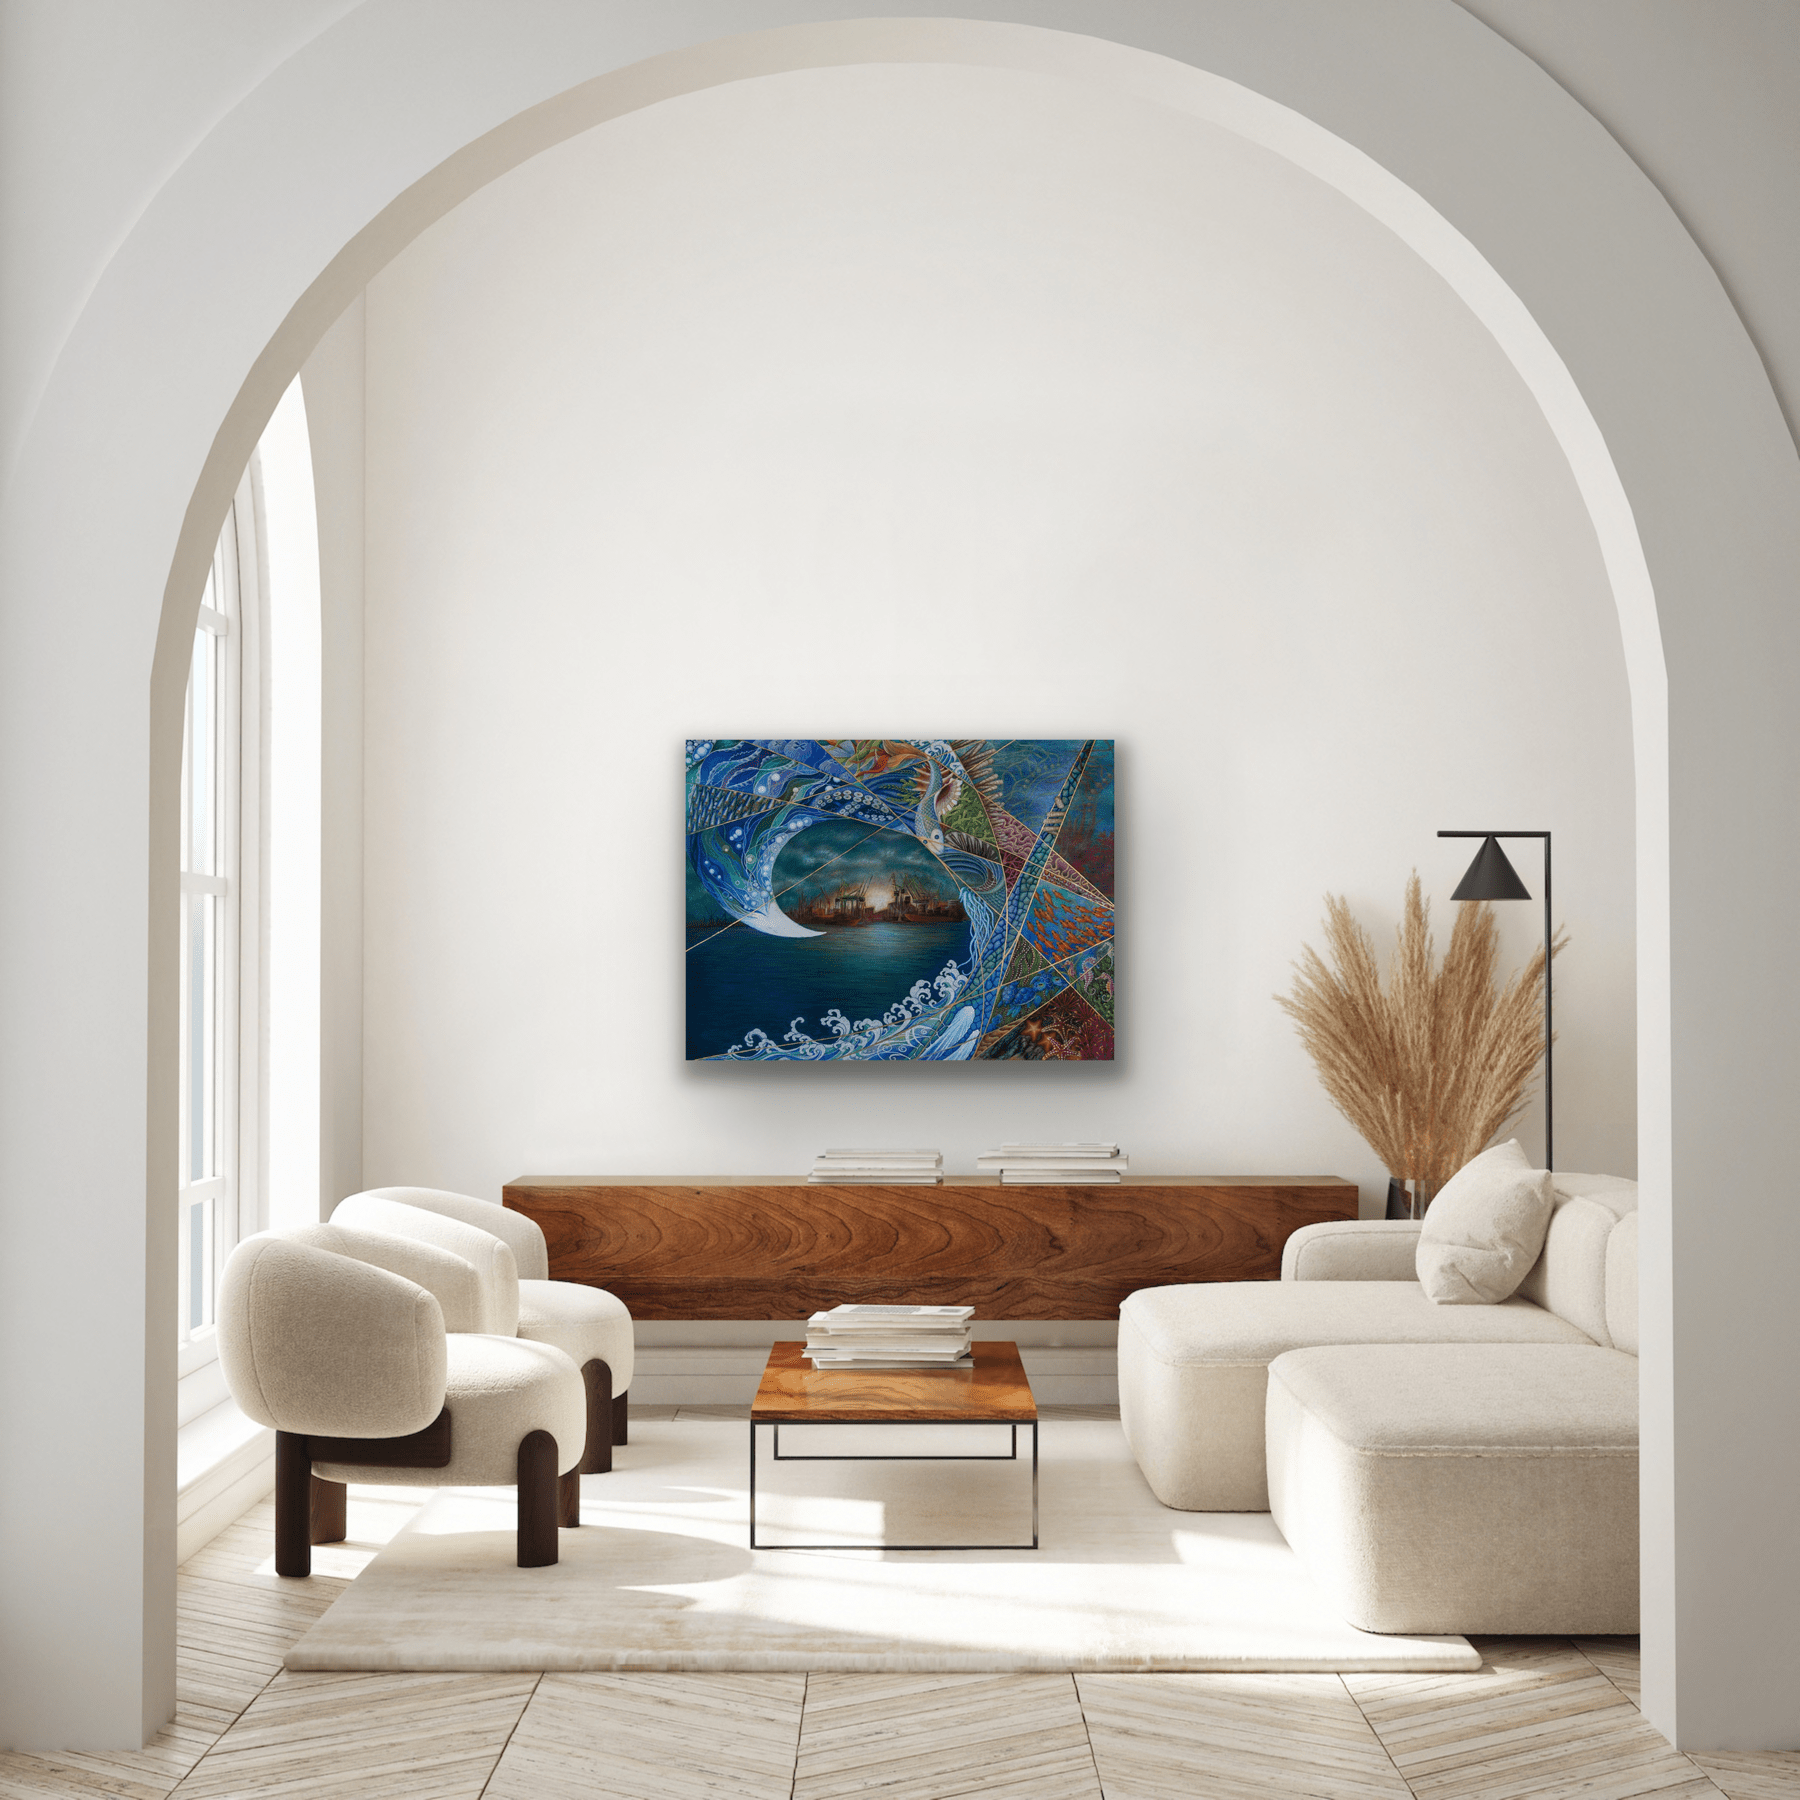 The stunning piece comes in four canvas print sizes.